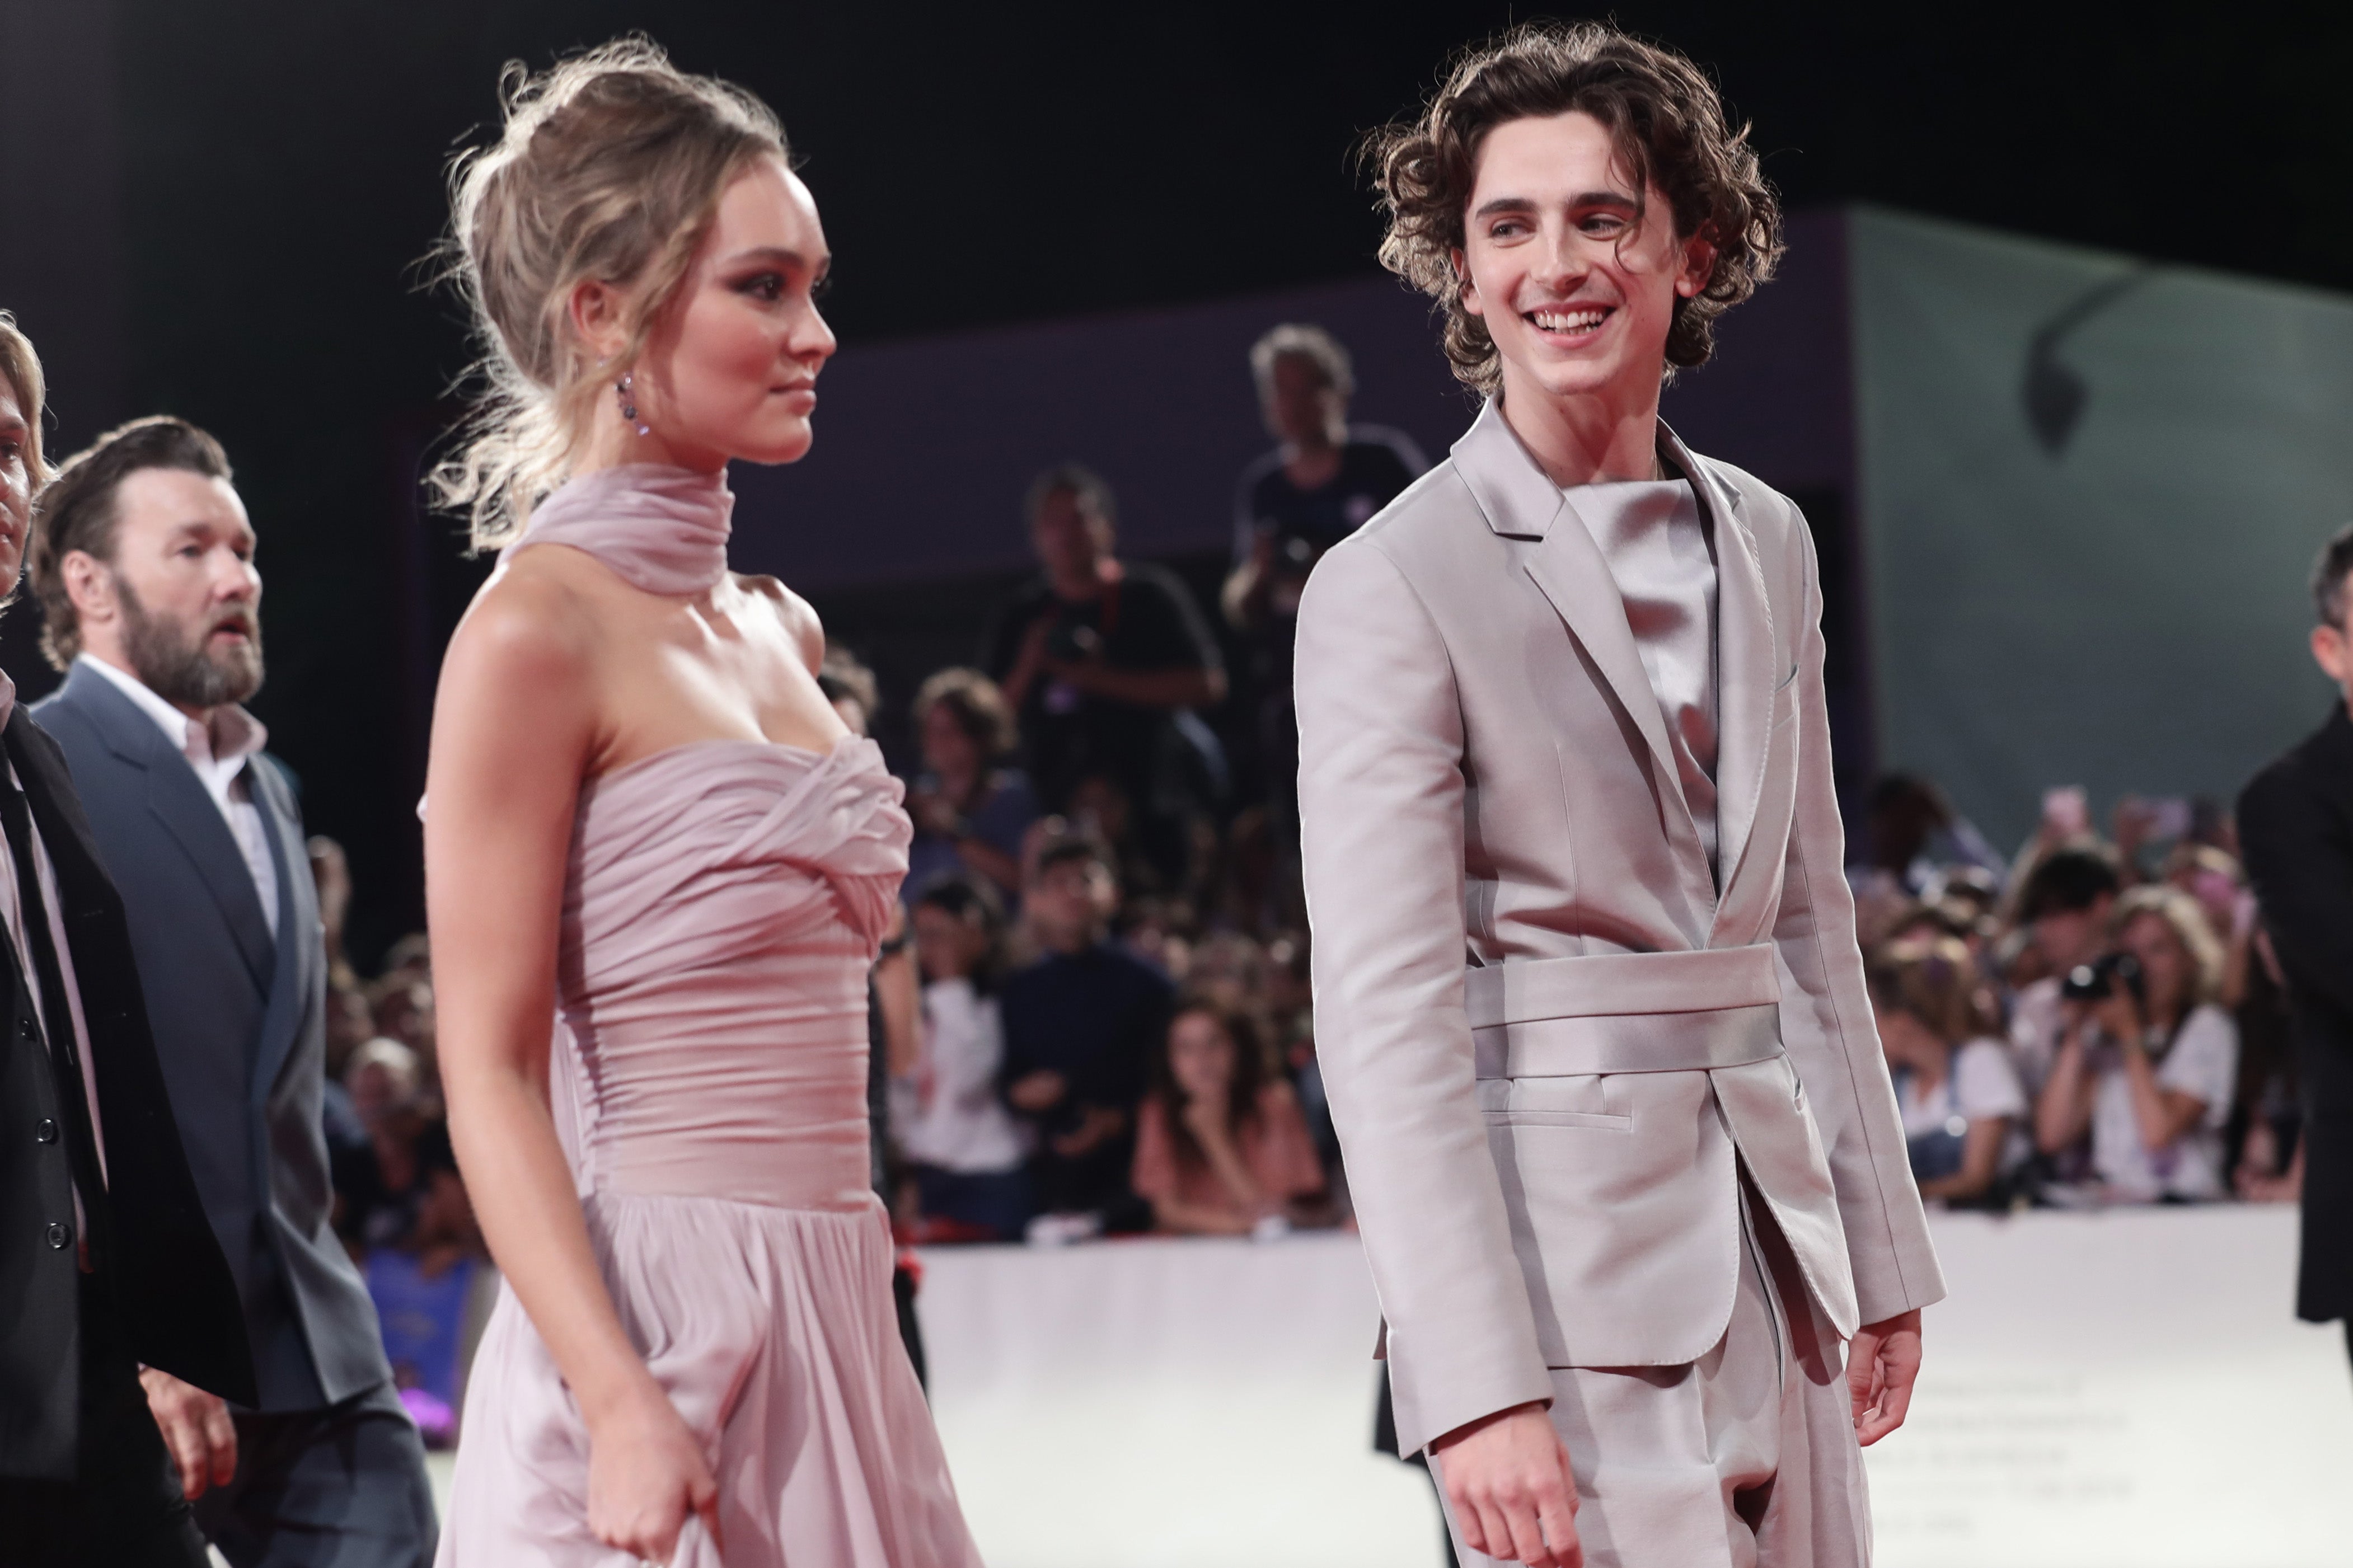 Timothee Chalamet says he was ‘embarrassed’ by photos of himself and Lily-Rose Depp kissing